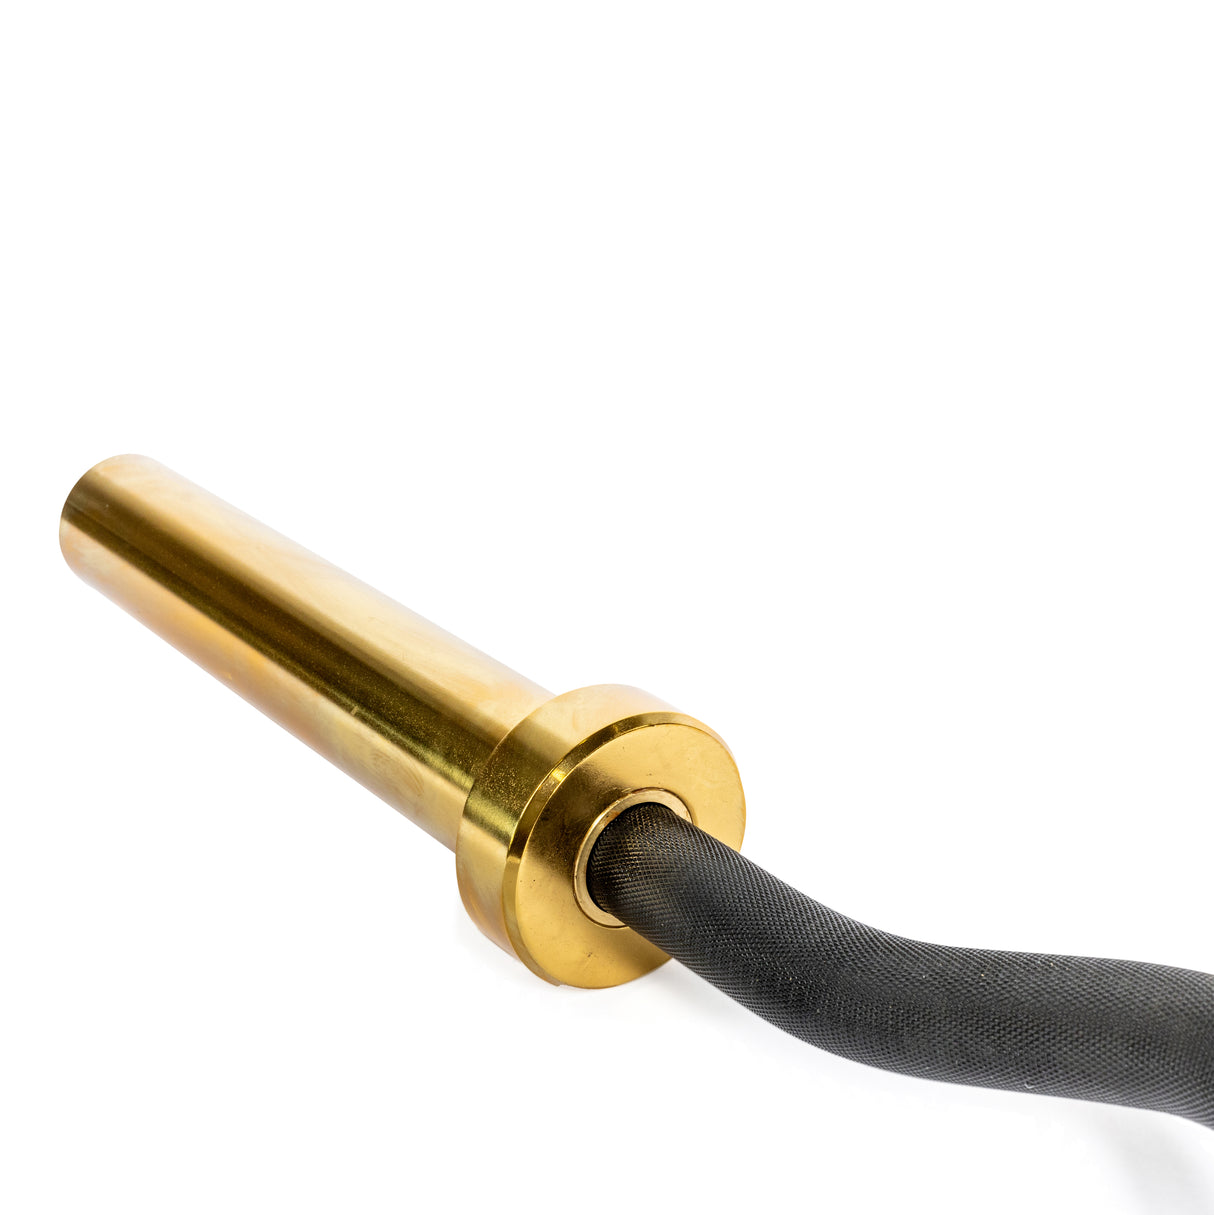 angled view of the  EZ Curl bar showing the gold sleeves